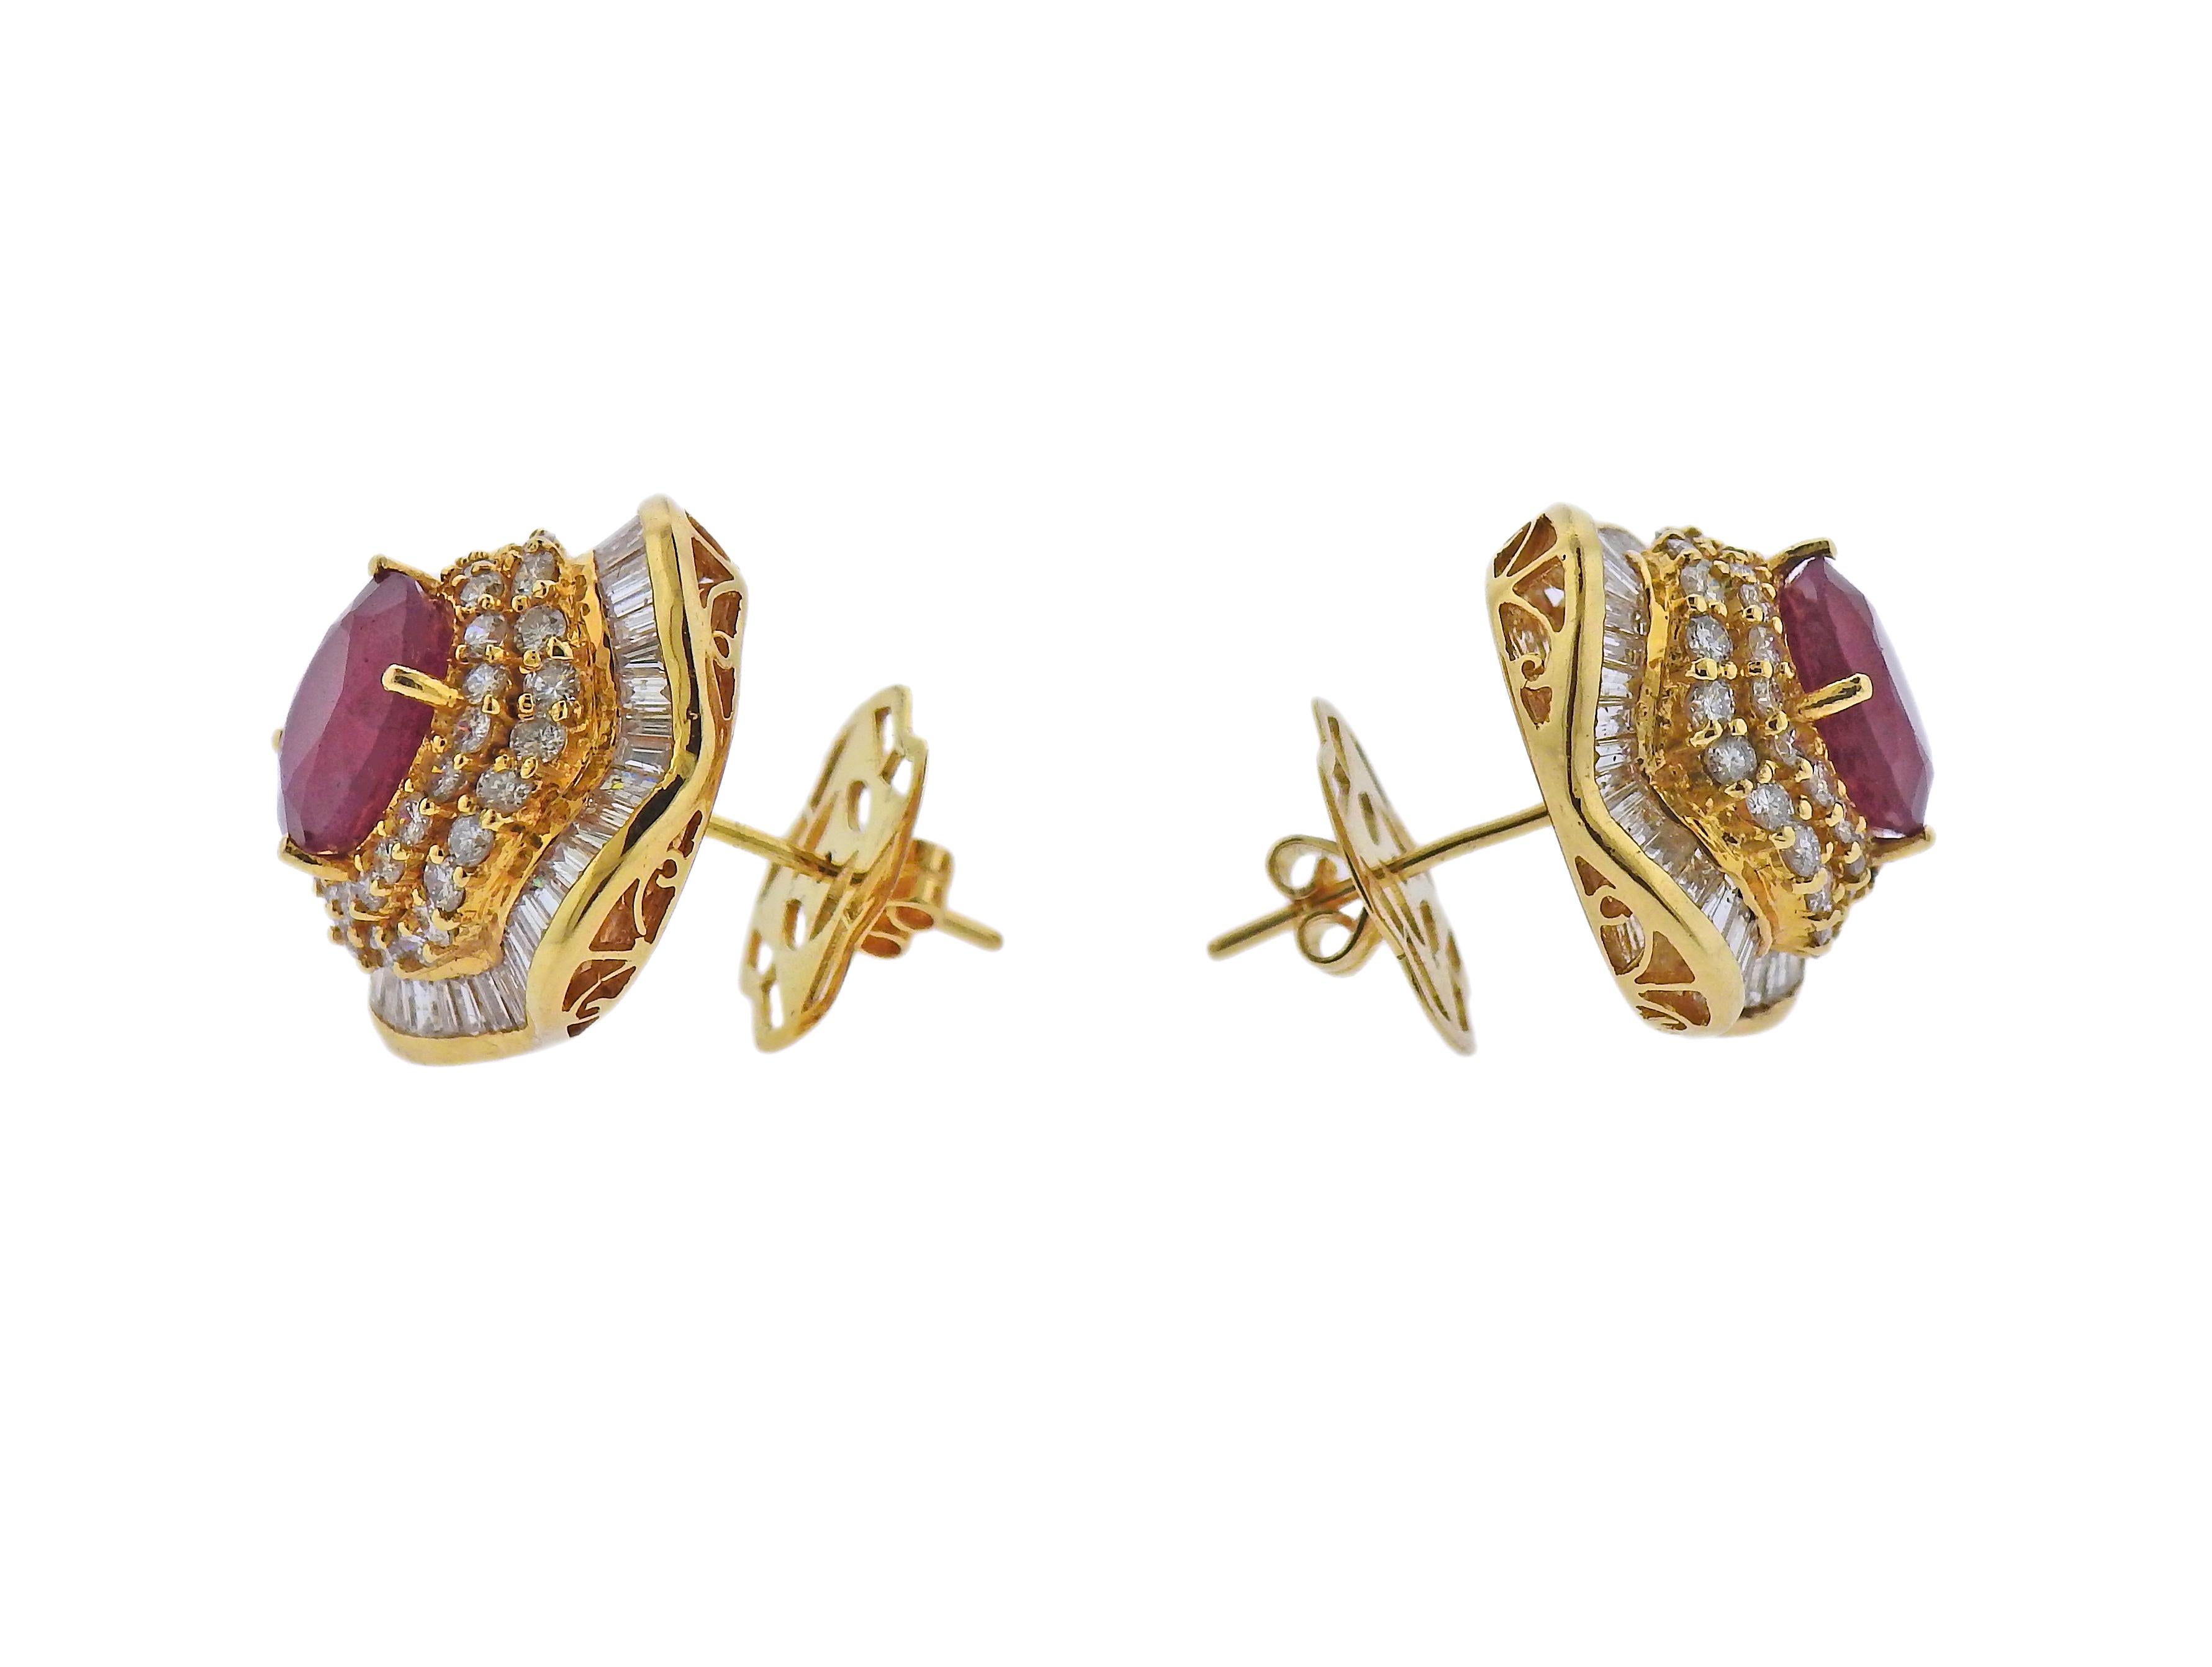 Pair of 18k gold cocktail earrings, set with 10.8 x 9.7mm rubies, surrounded with approx. 3.20ctw in diamonds. Earrings are 26mm x 24mm. Marked 18k. Weight - 18.8 grams.